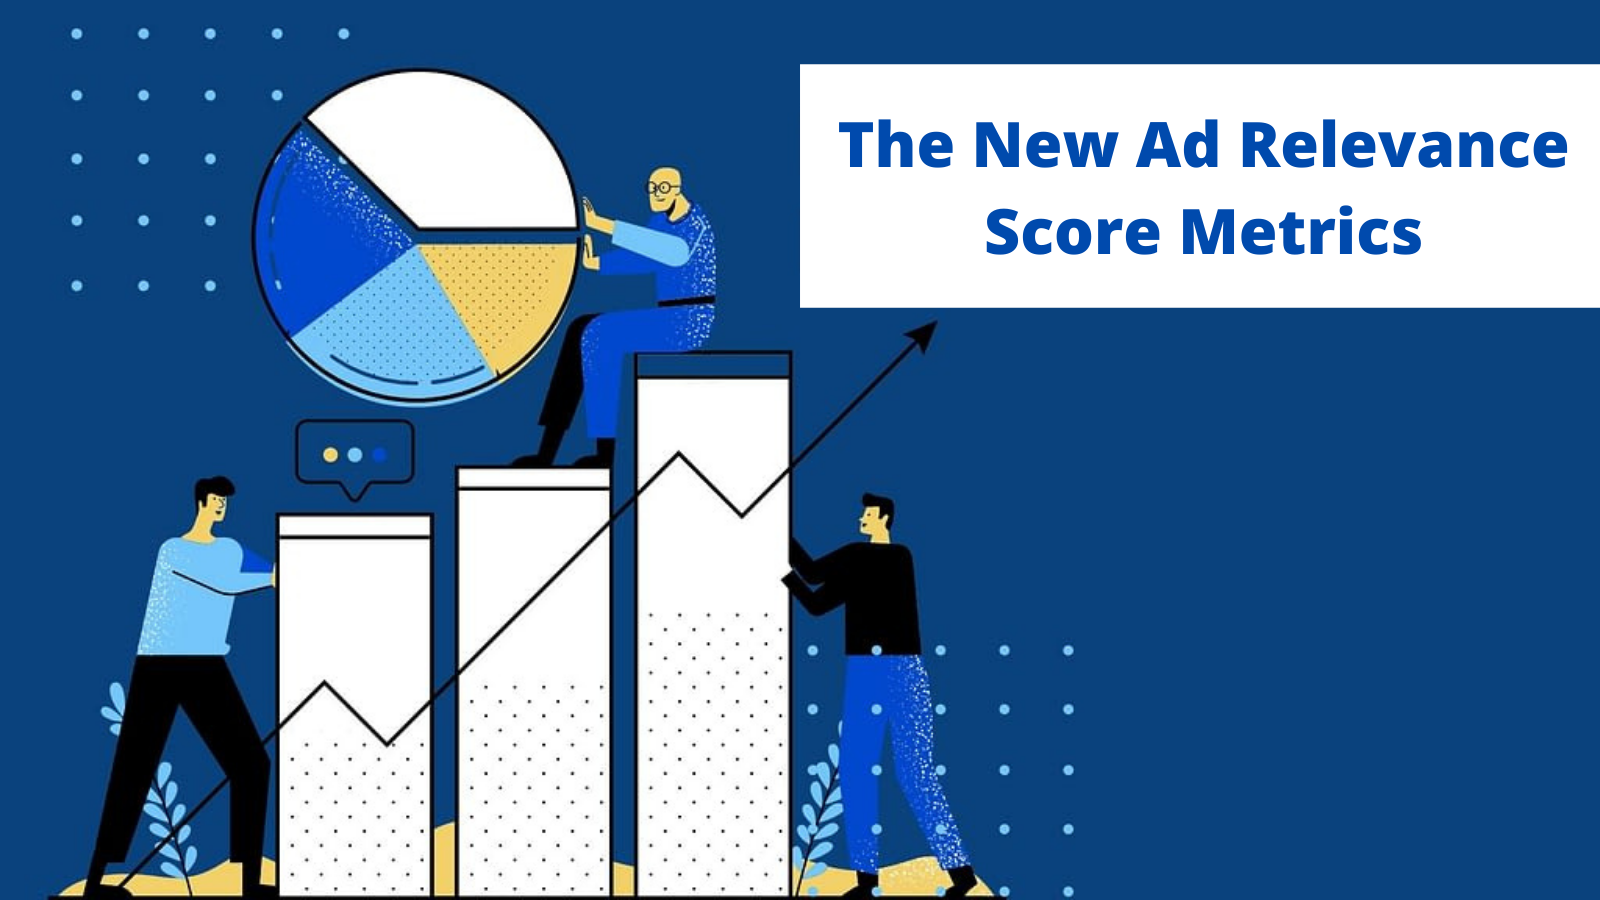 What-Are-The-New-Ad-Relevance-Score-Metrics